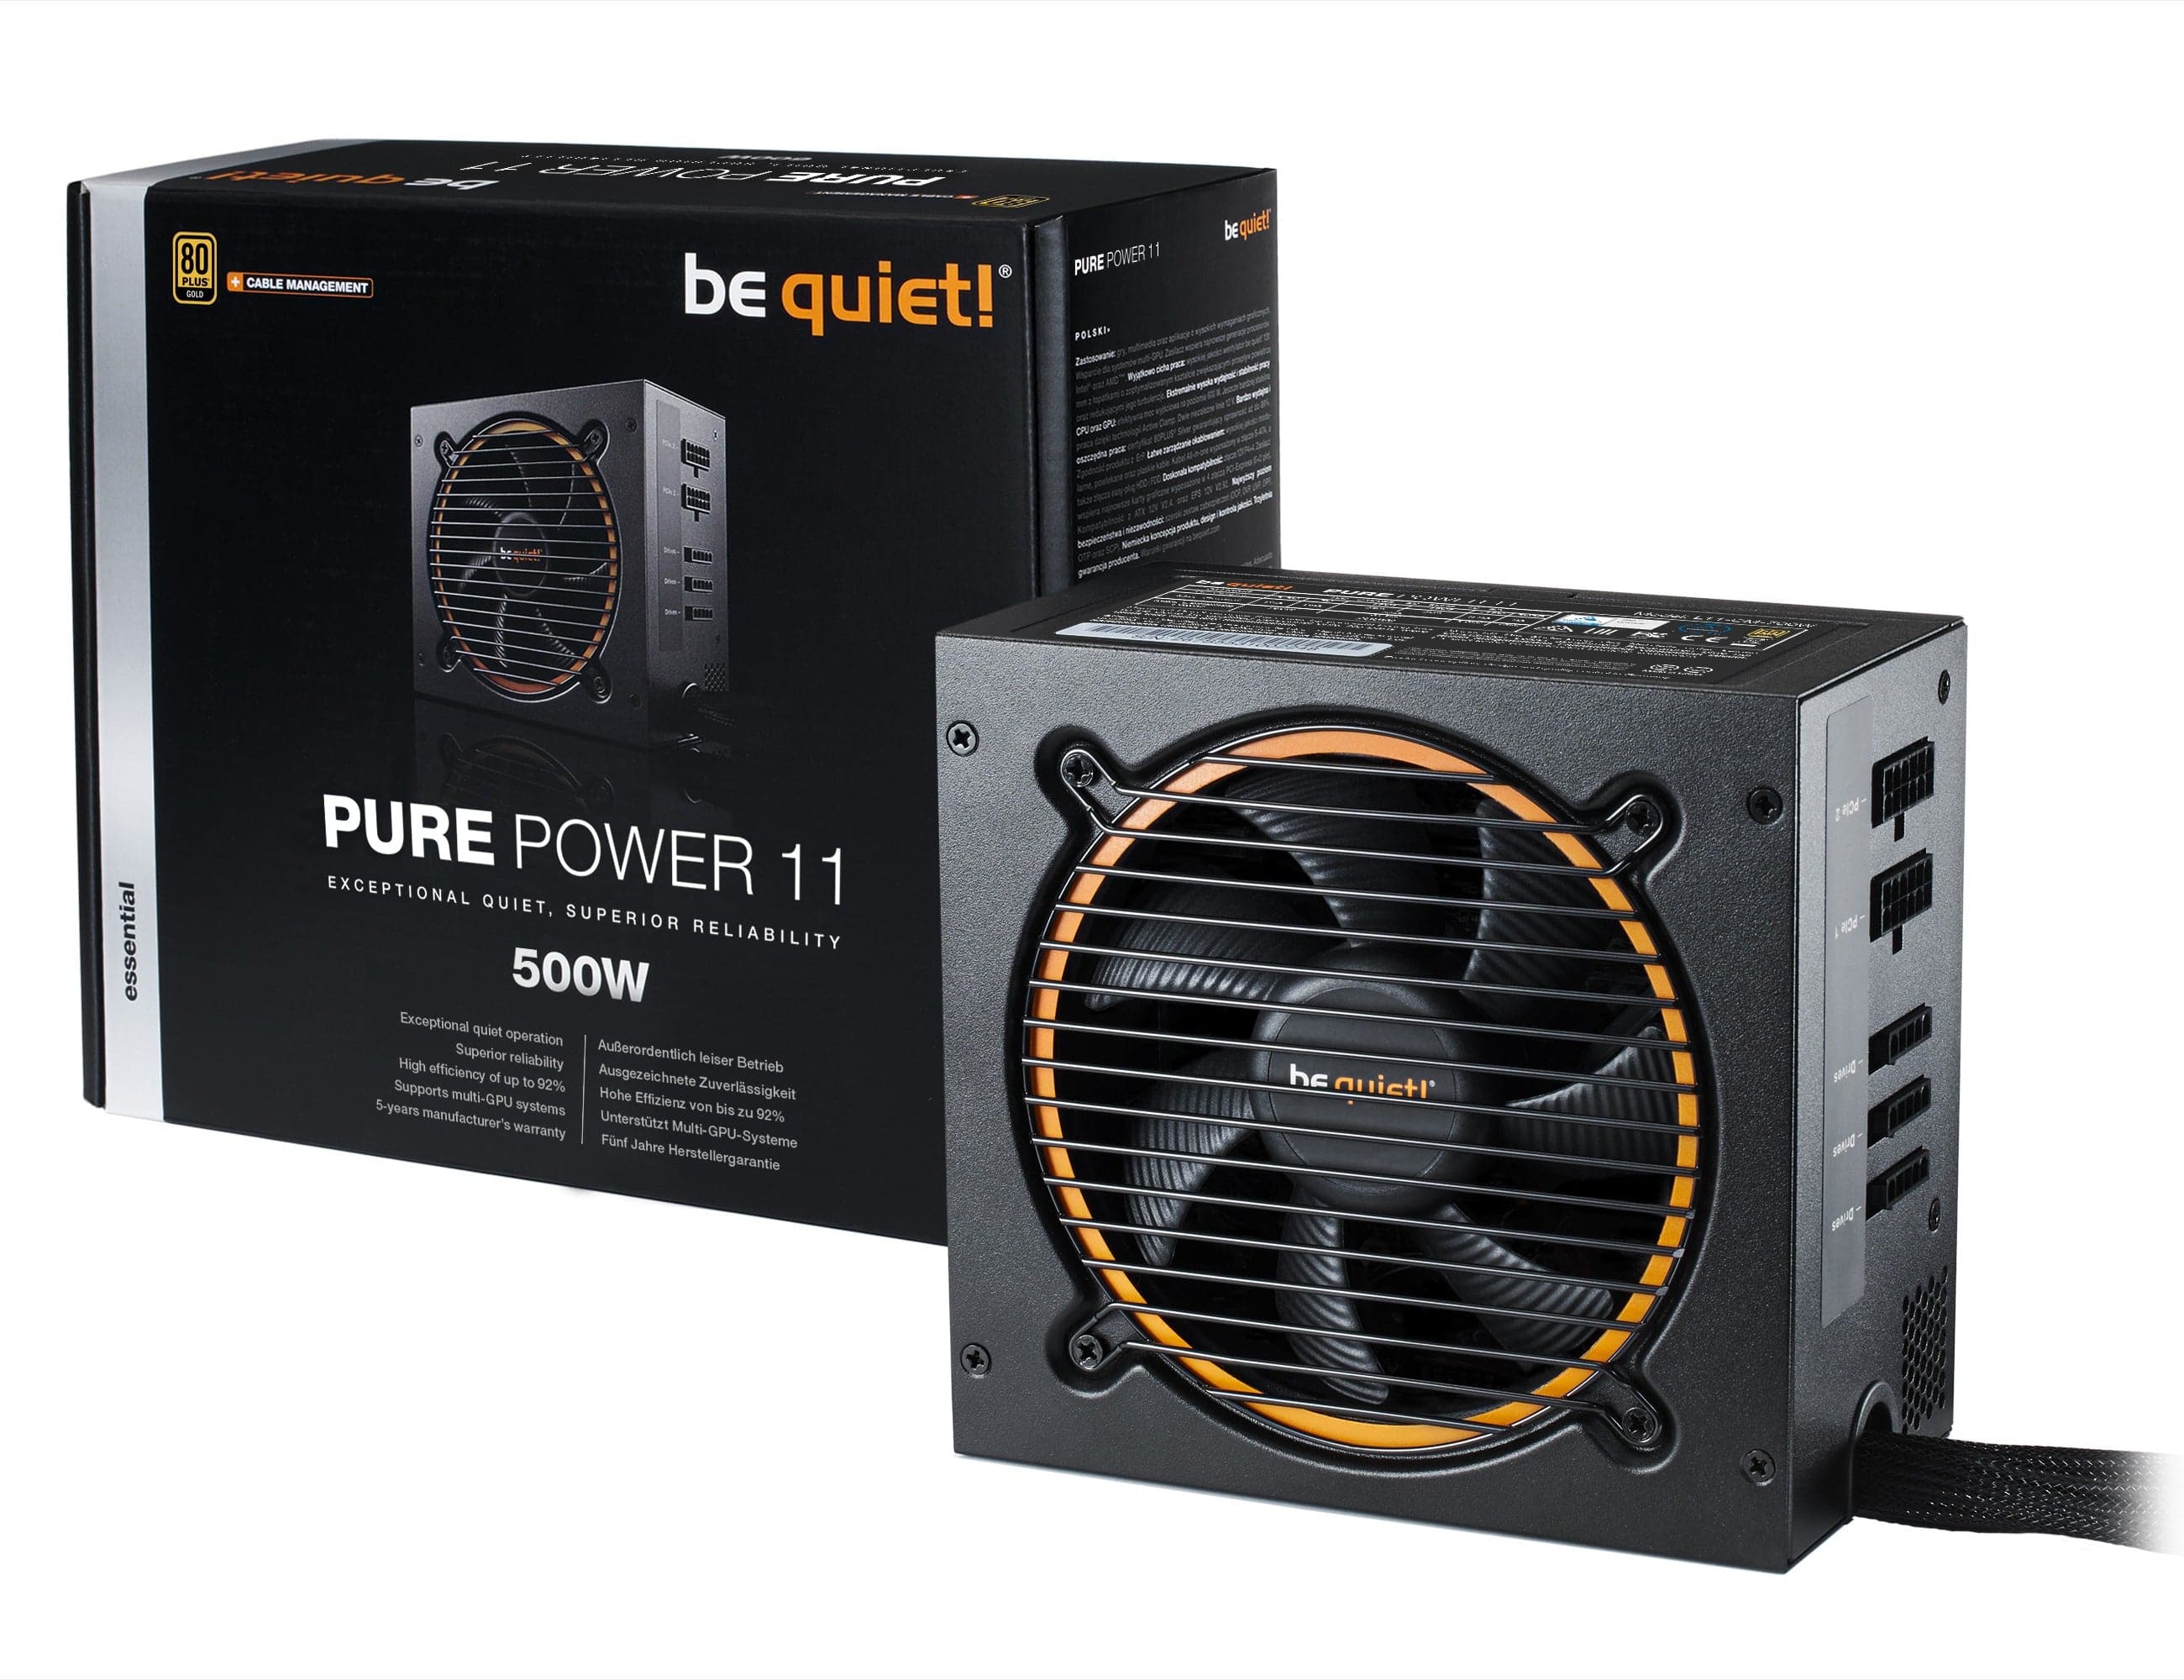 be quiet! Pure Power 11 - 500W be quiet!